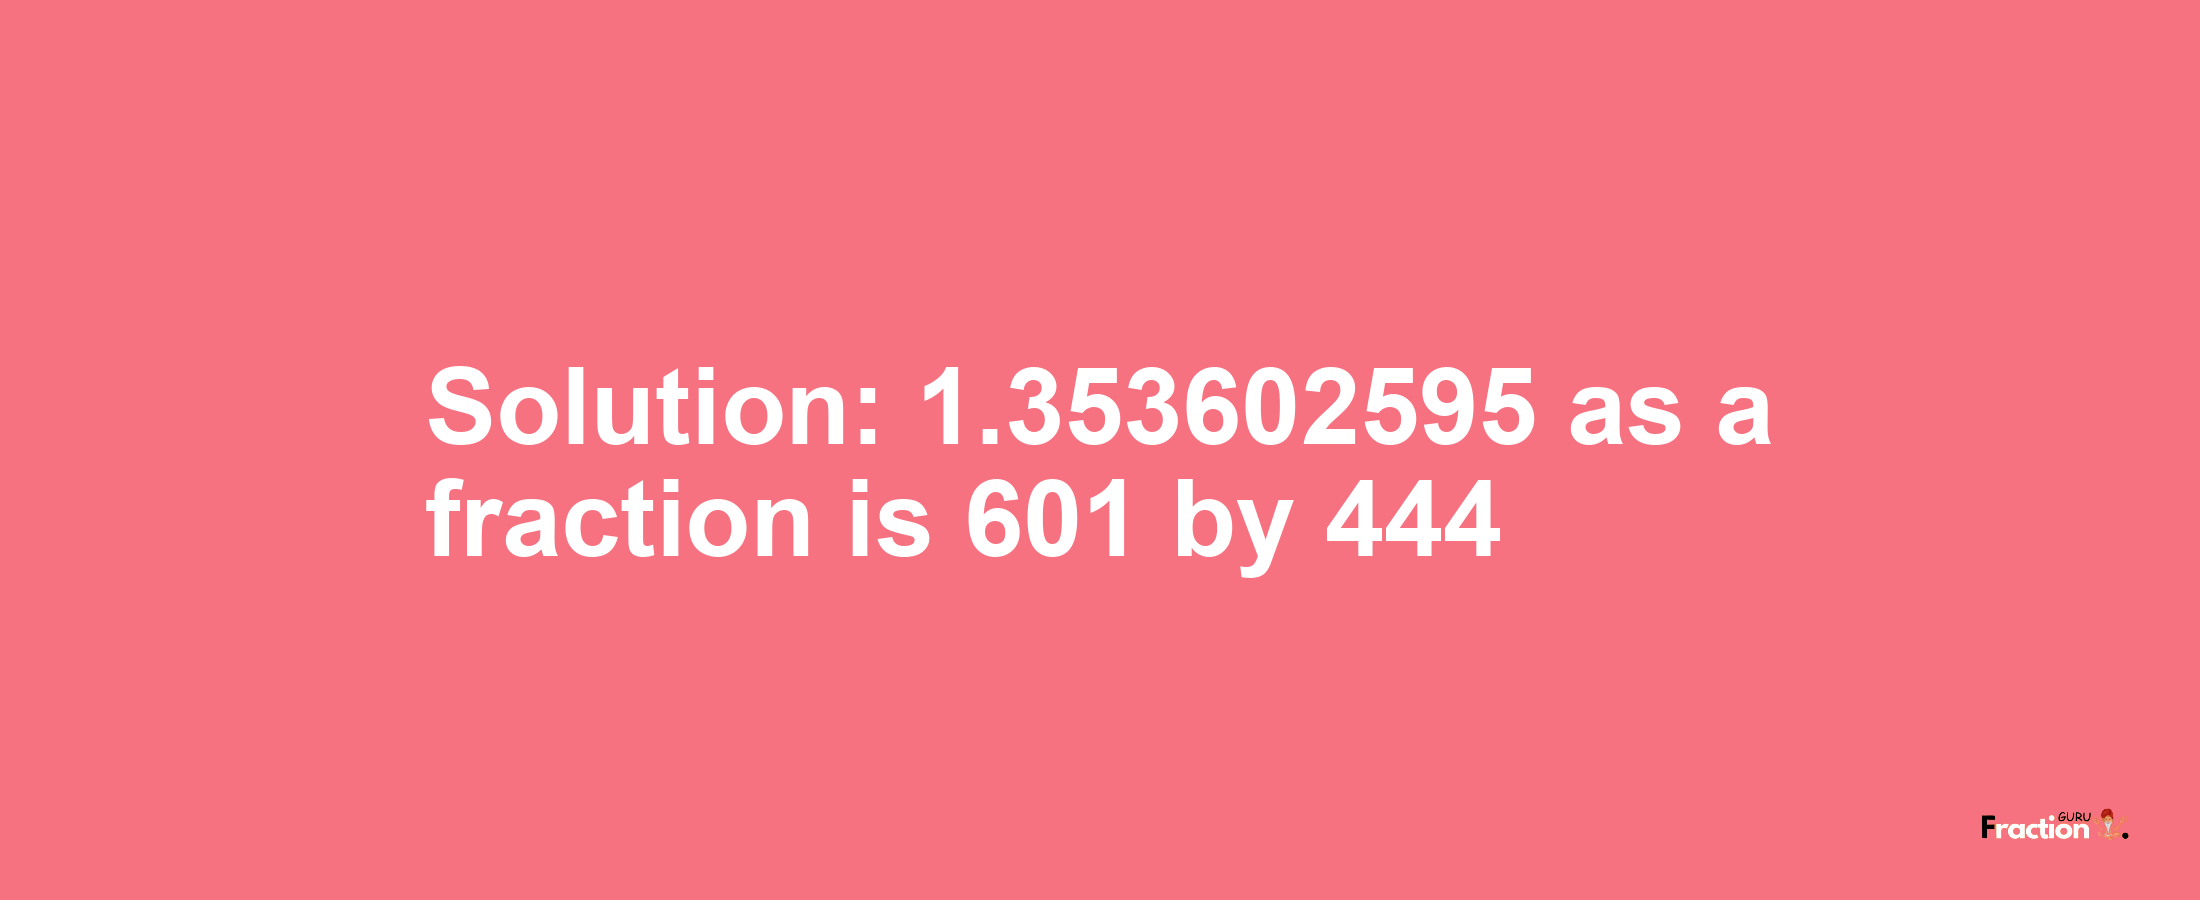 Solution:1.353602595 as a fraction is 601/444